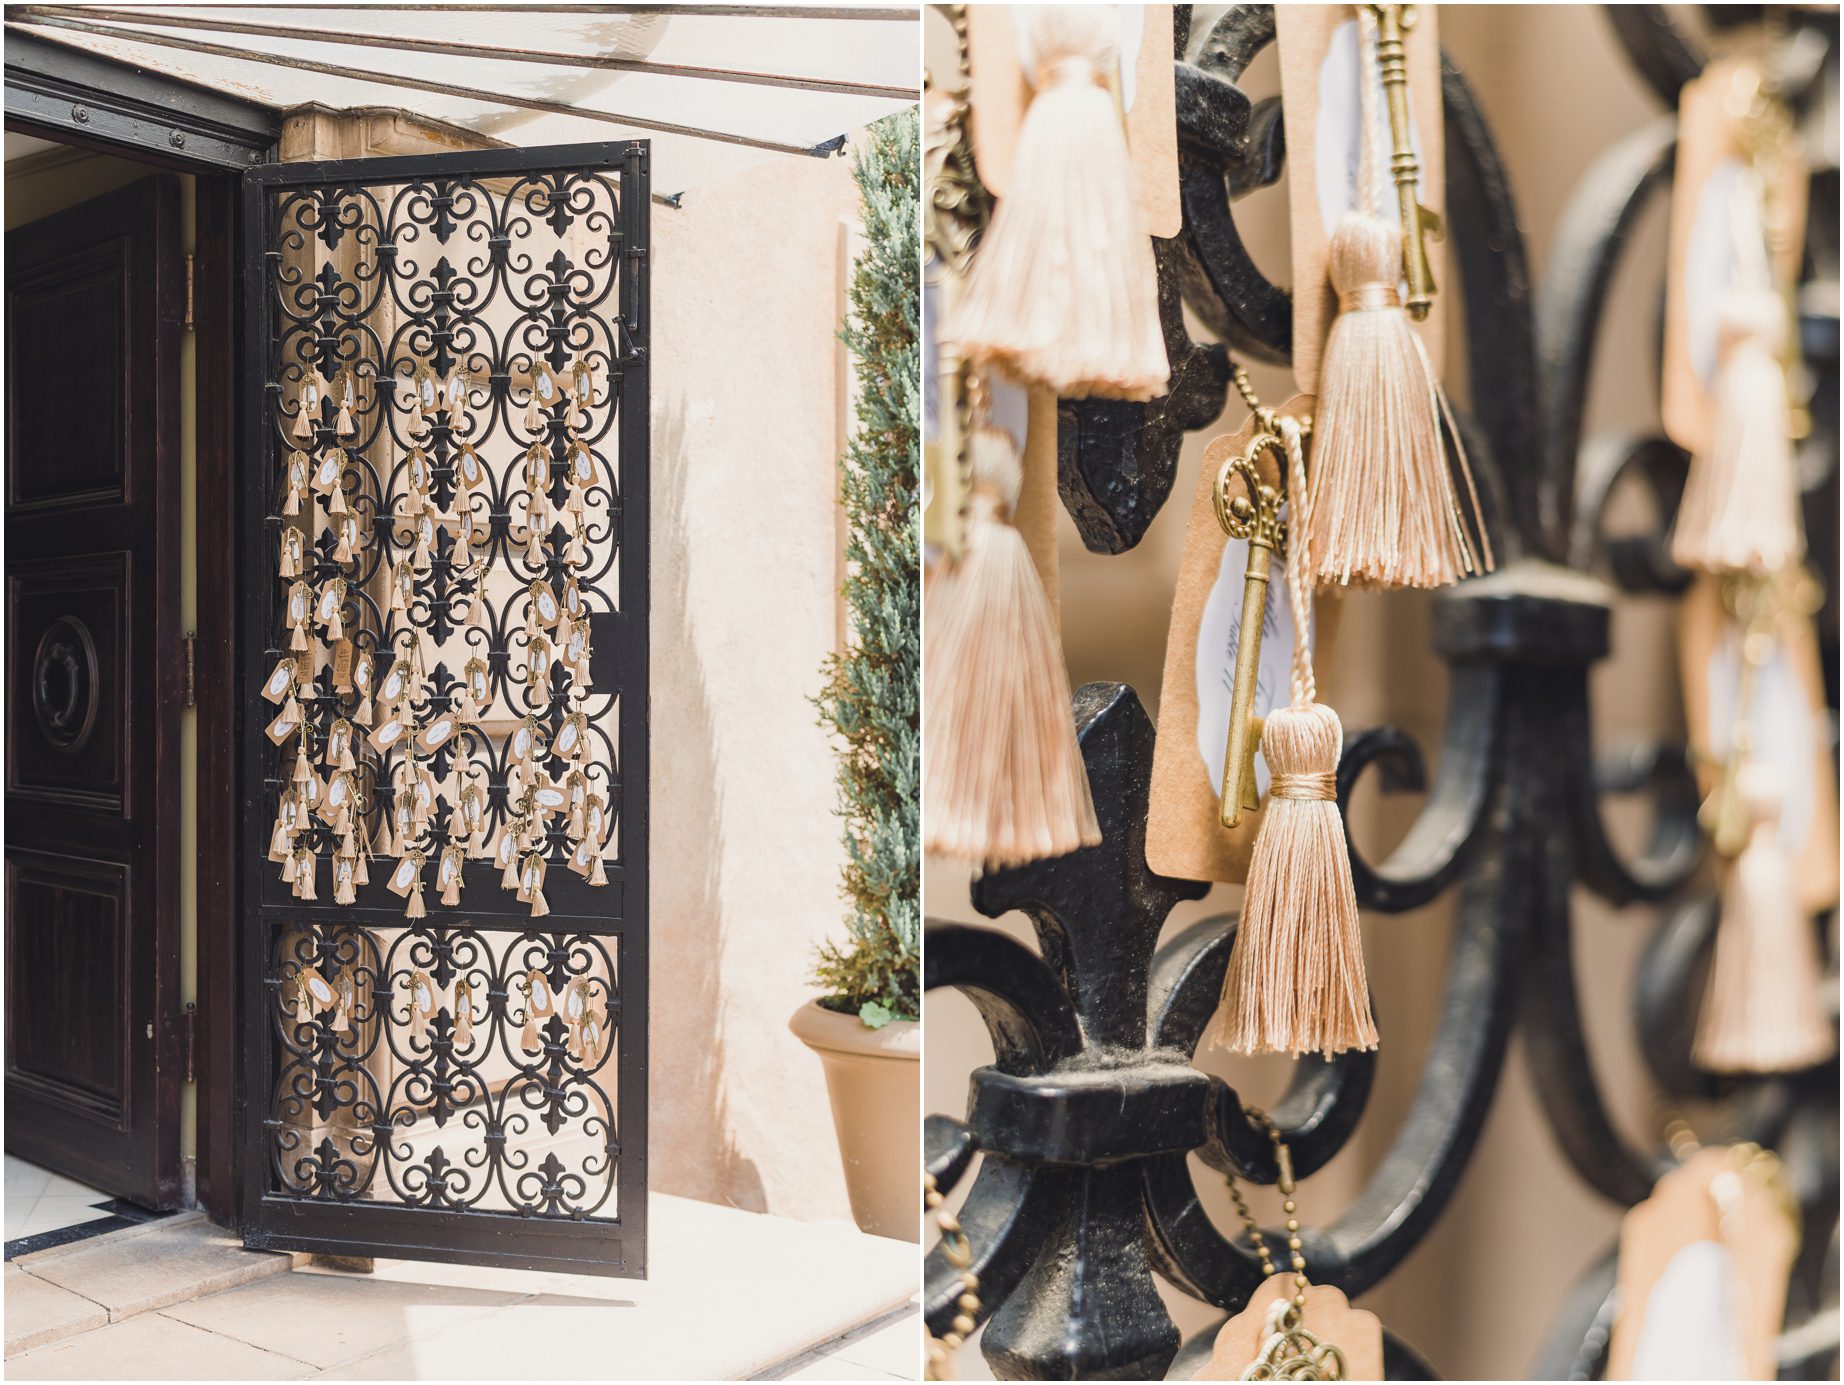 Seating tags for a wedding at Villa del sol d'Oro featuring keys and tassels hanging on a wrought iron door